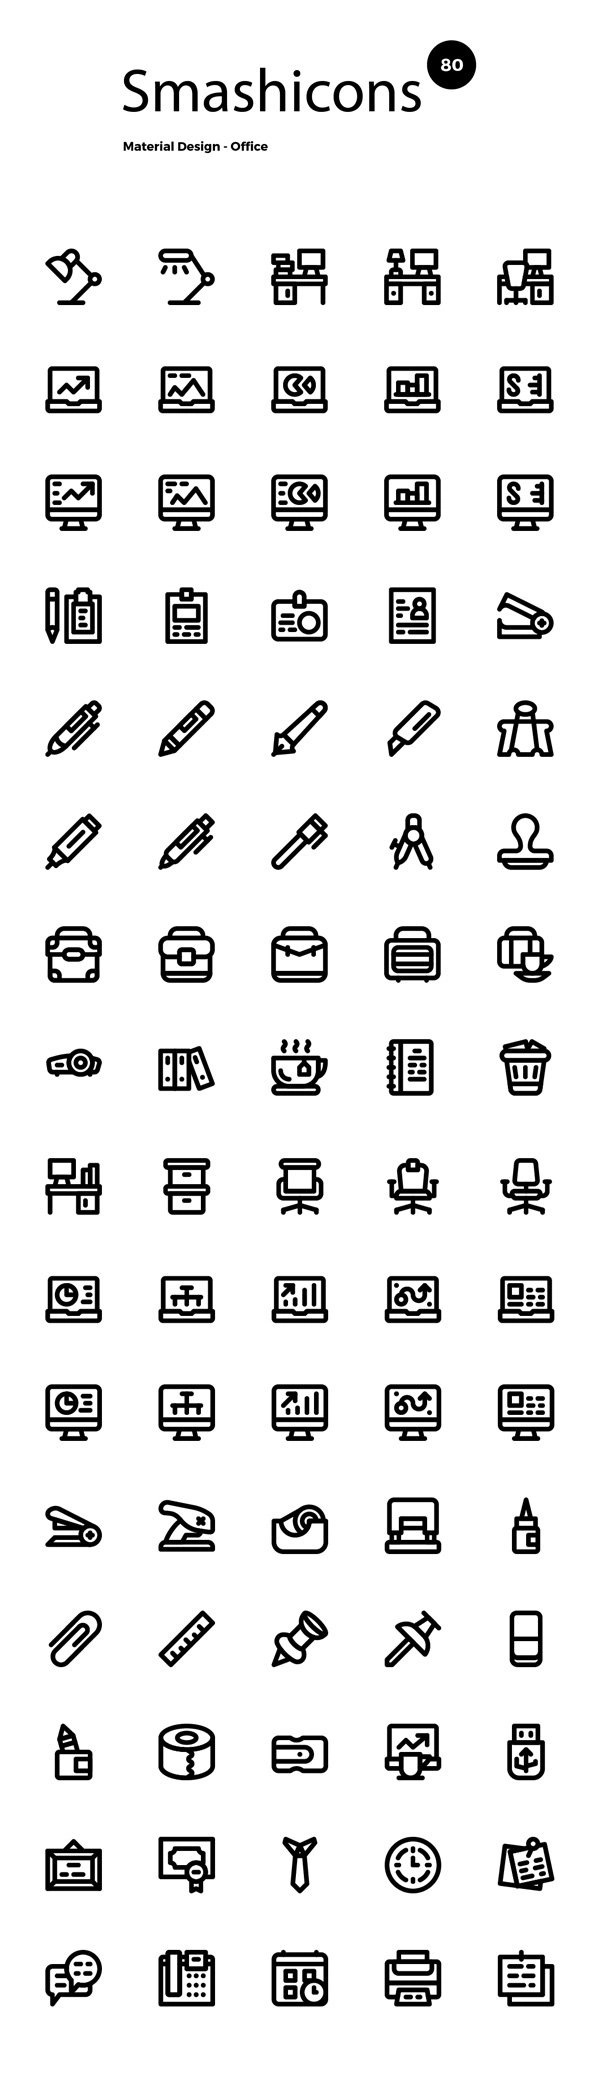 80 Material Office Icons